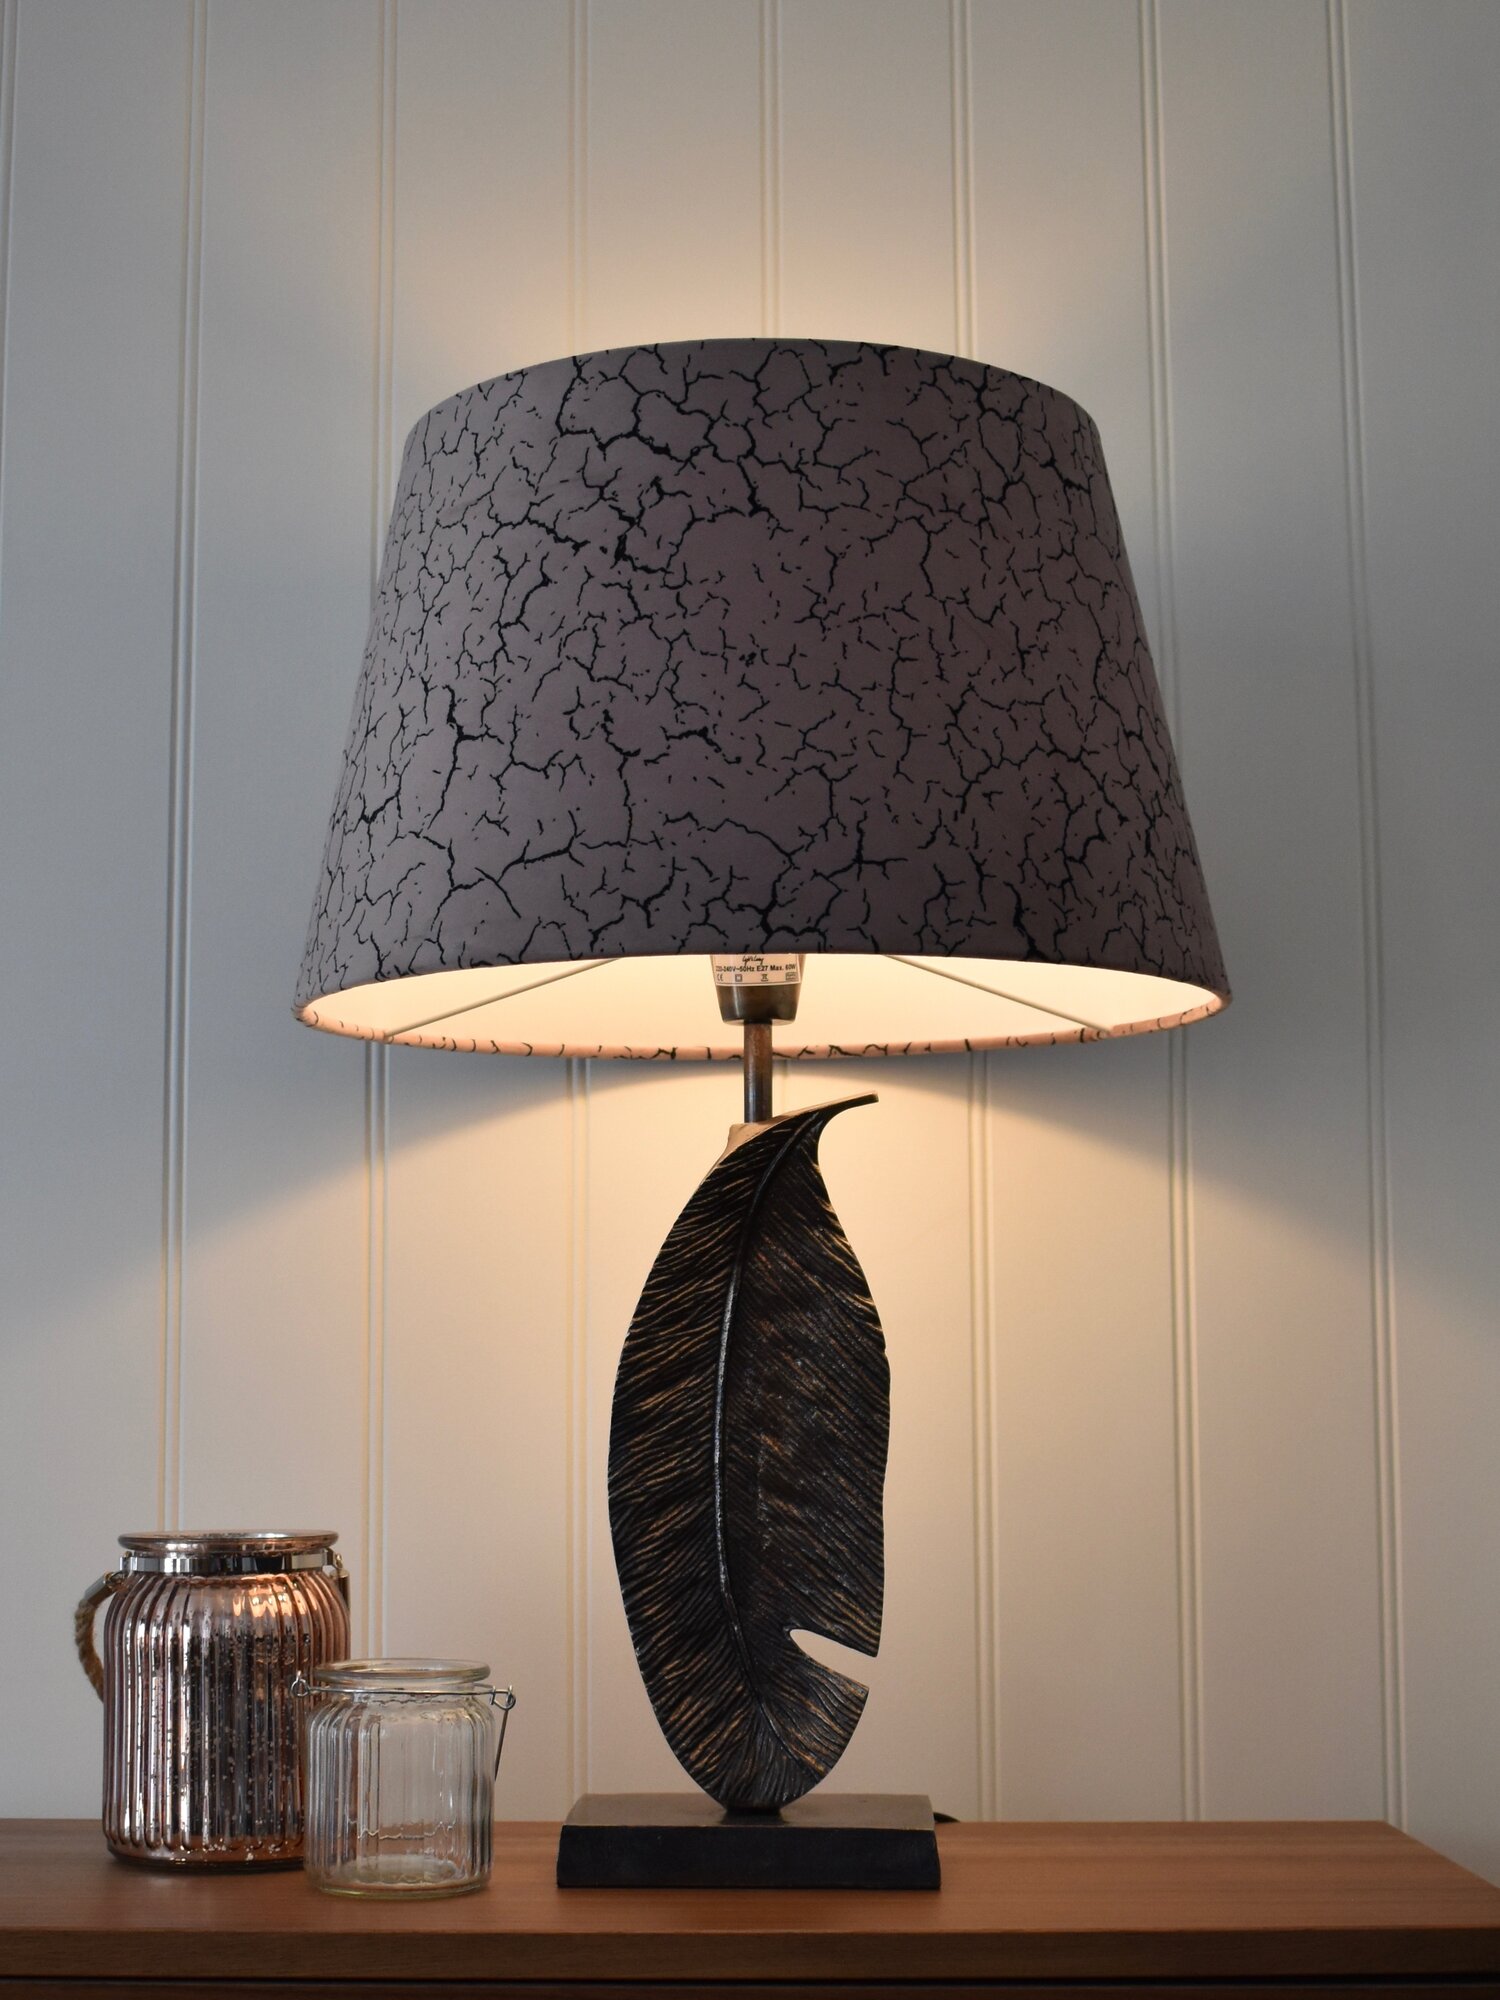 Tapered French Drum Empire Lamp Shades, Empire Lamp Shades Uk